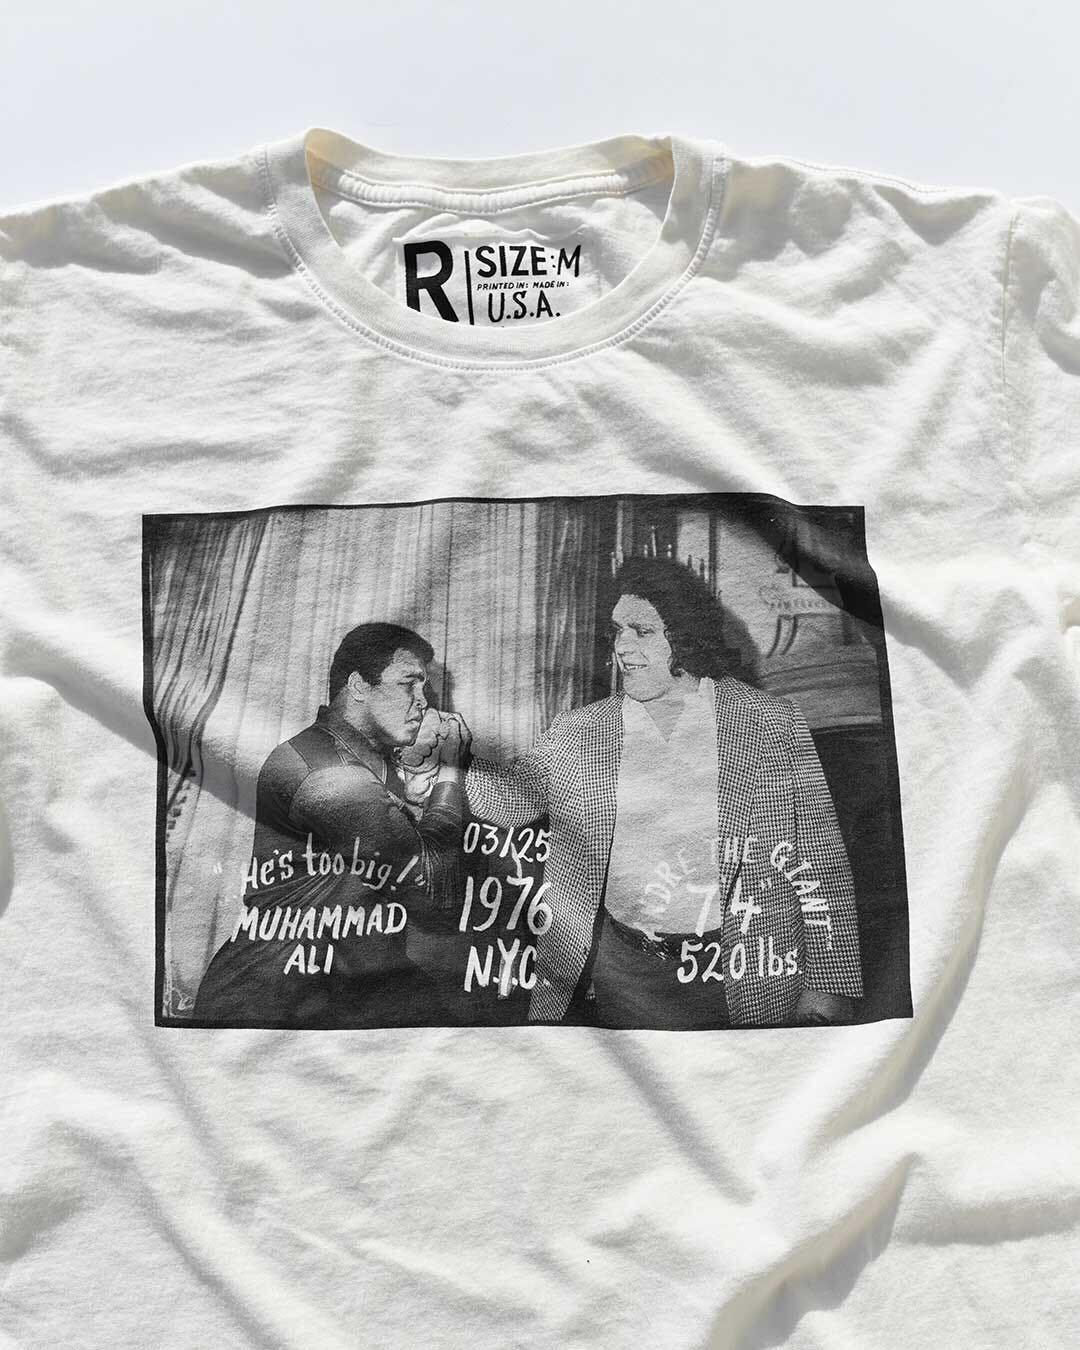 Ali & Andre "He's Too Big" Photo Tee - Roots of Fight Canada